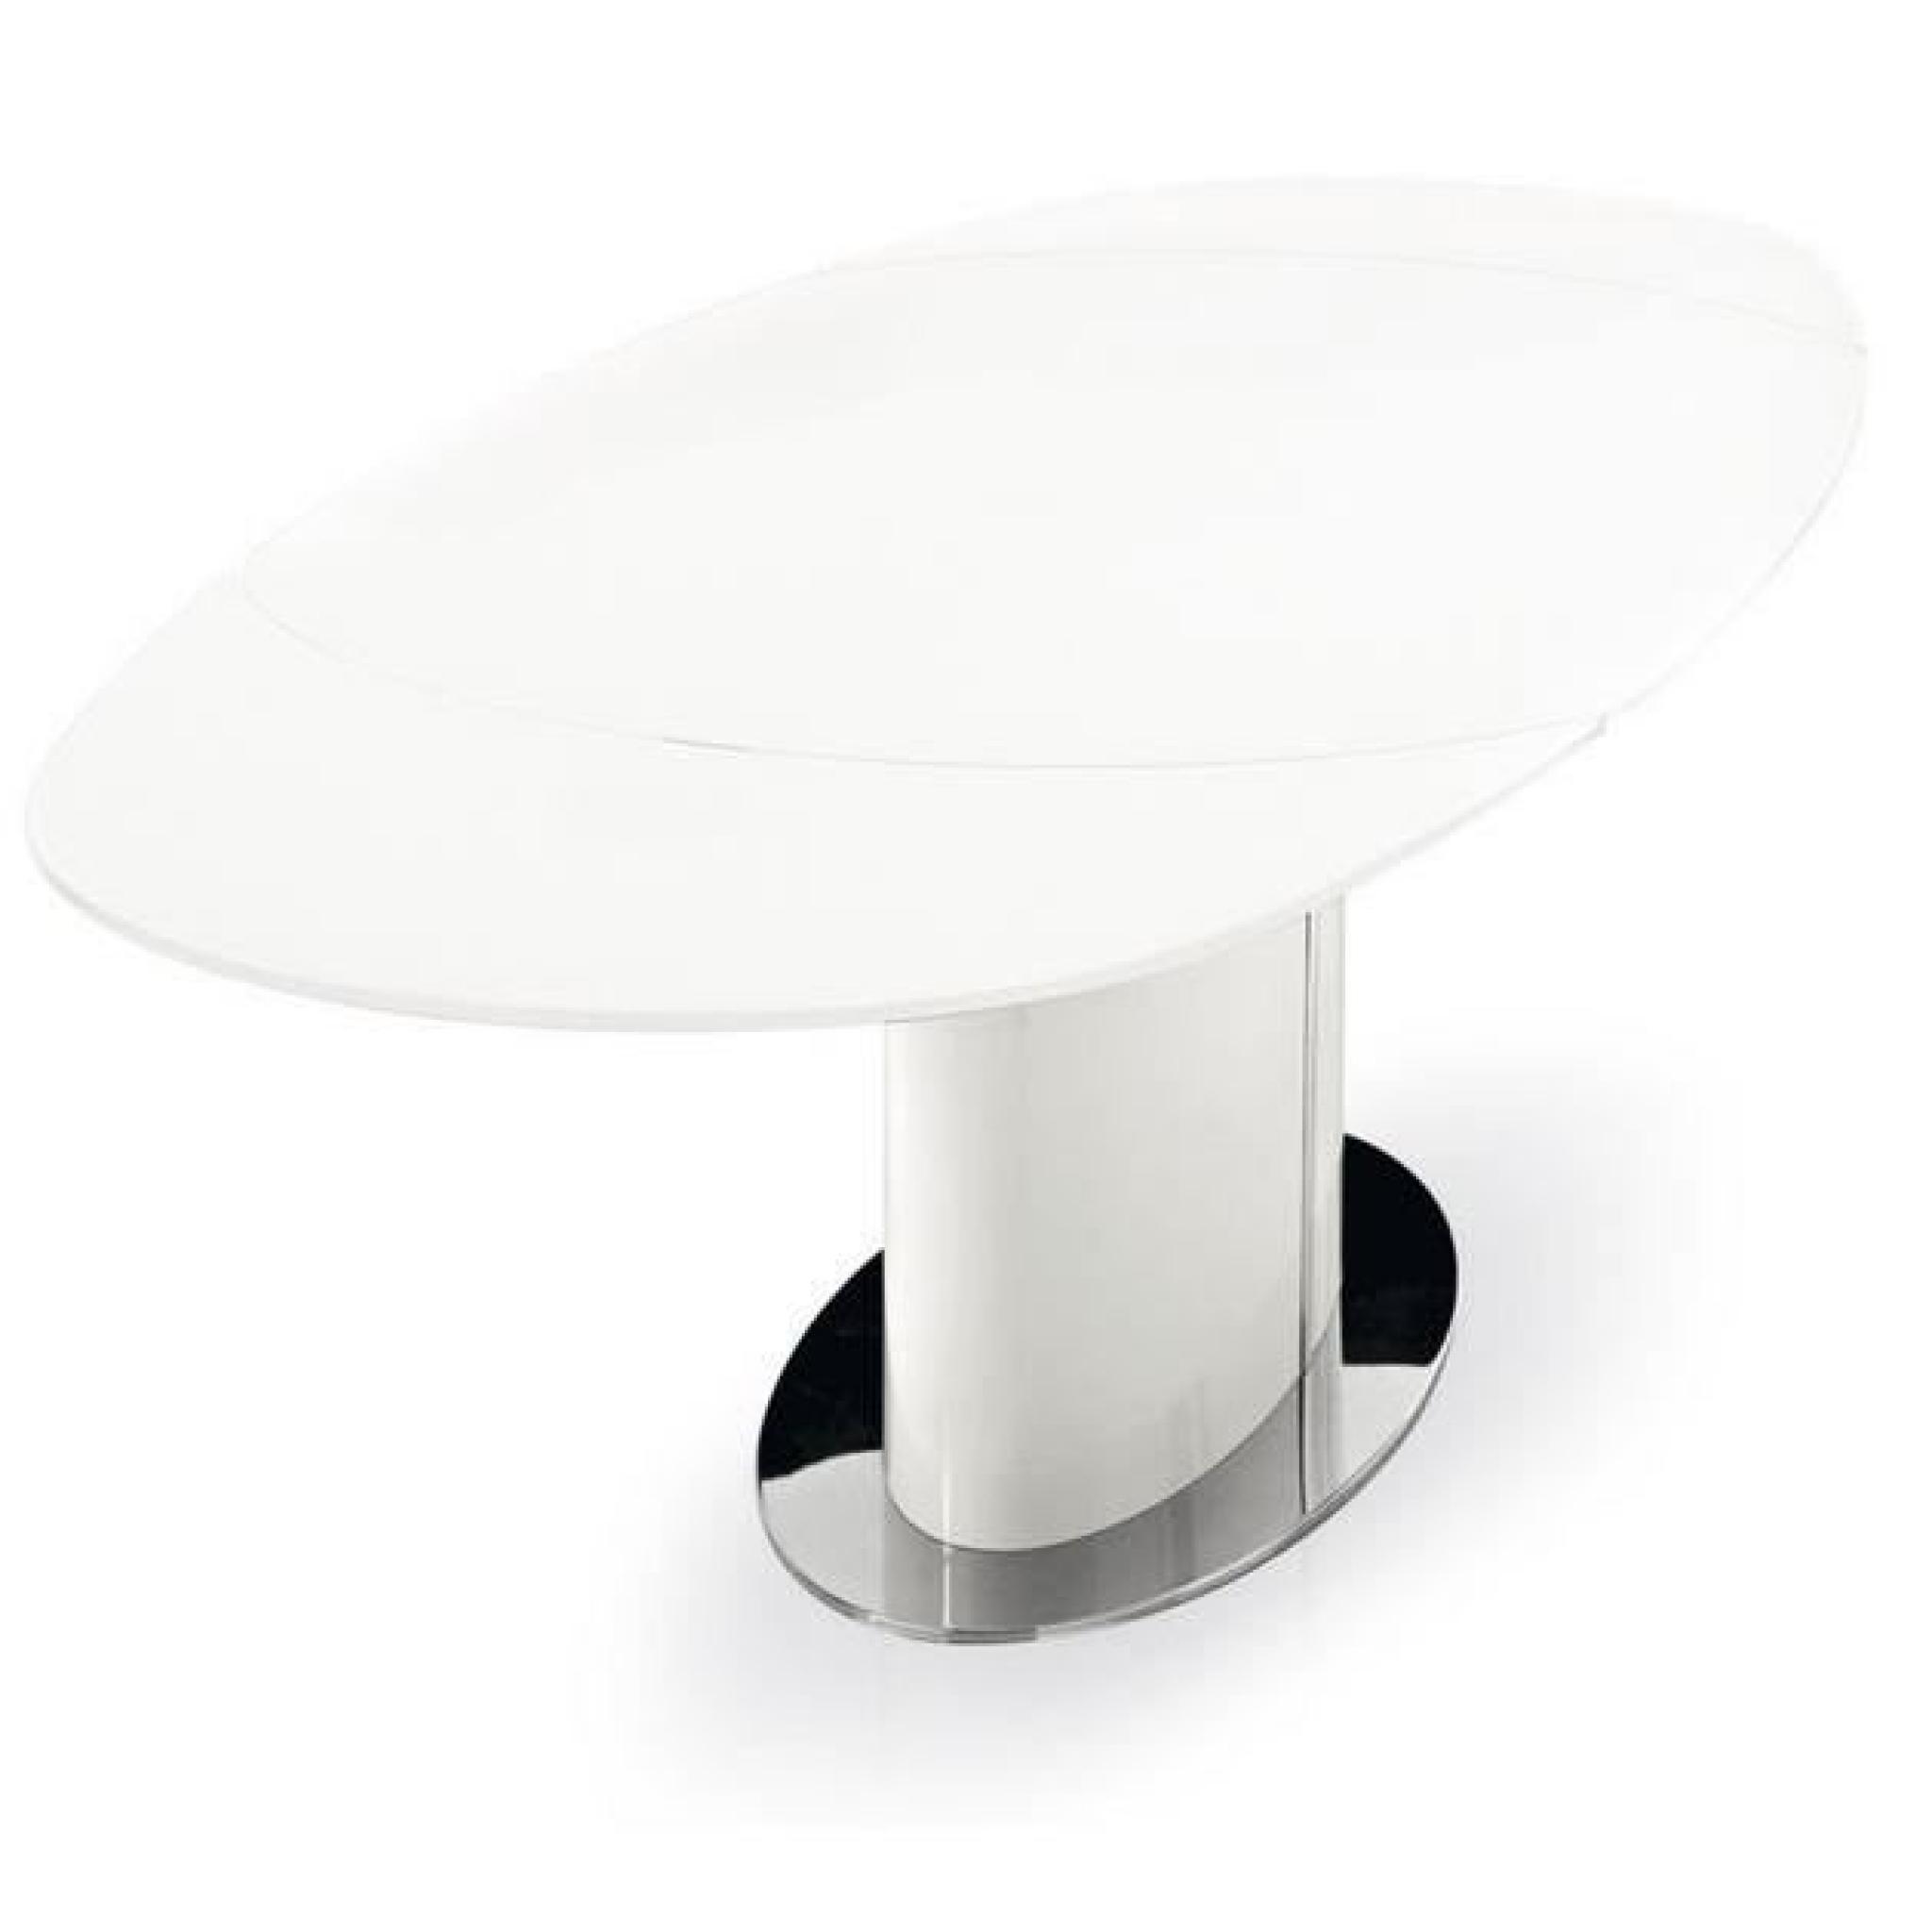 Table repas ovale extensible ODYSSEY 165x105 bl... pas cher